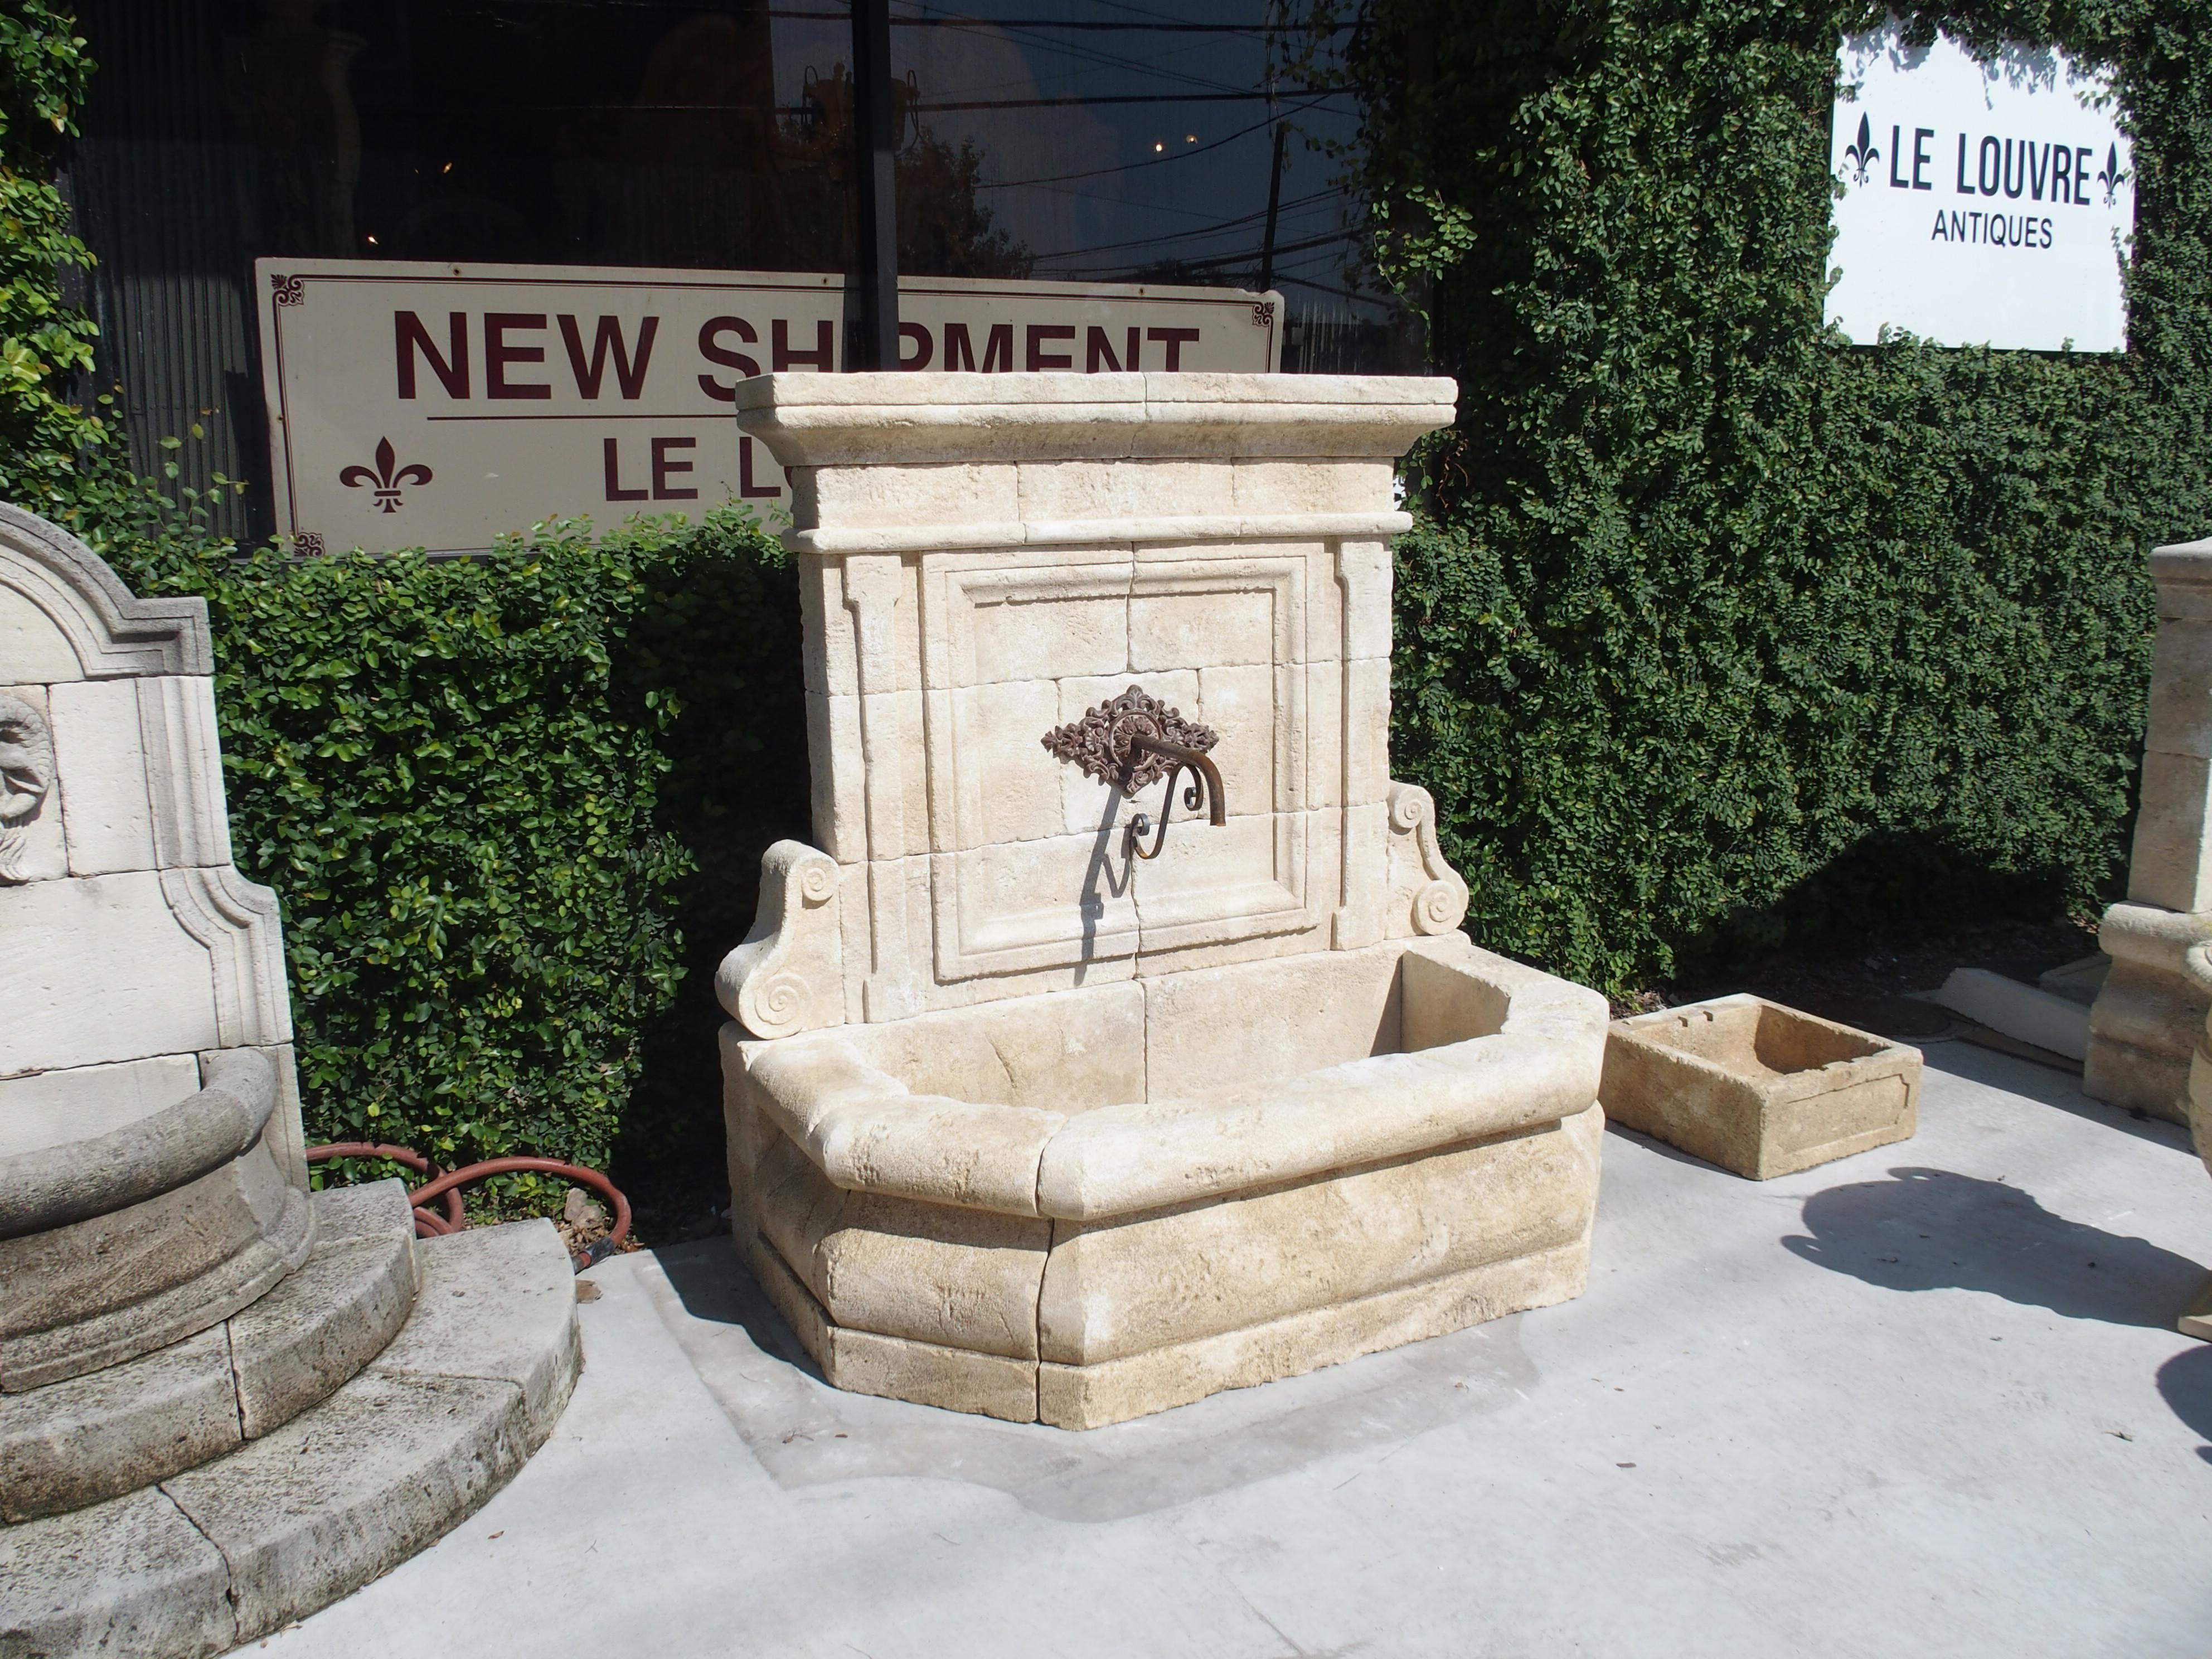 This wall fountain from The Vaucluse in Provence has been hand carved in Estaillade limestone. The elegantly carved stone fountain has a classical feel as there are a few iconic architectural features present. The crown features Cavetto molding,